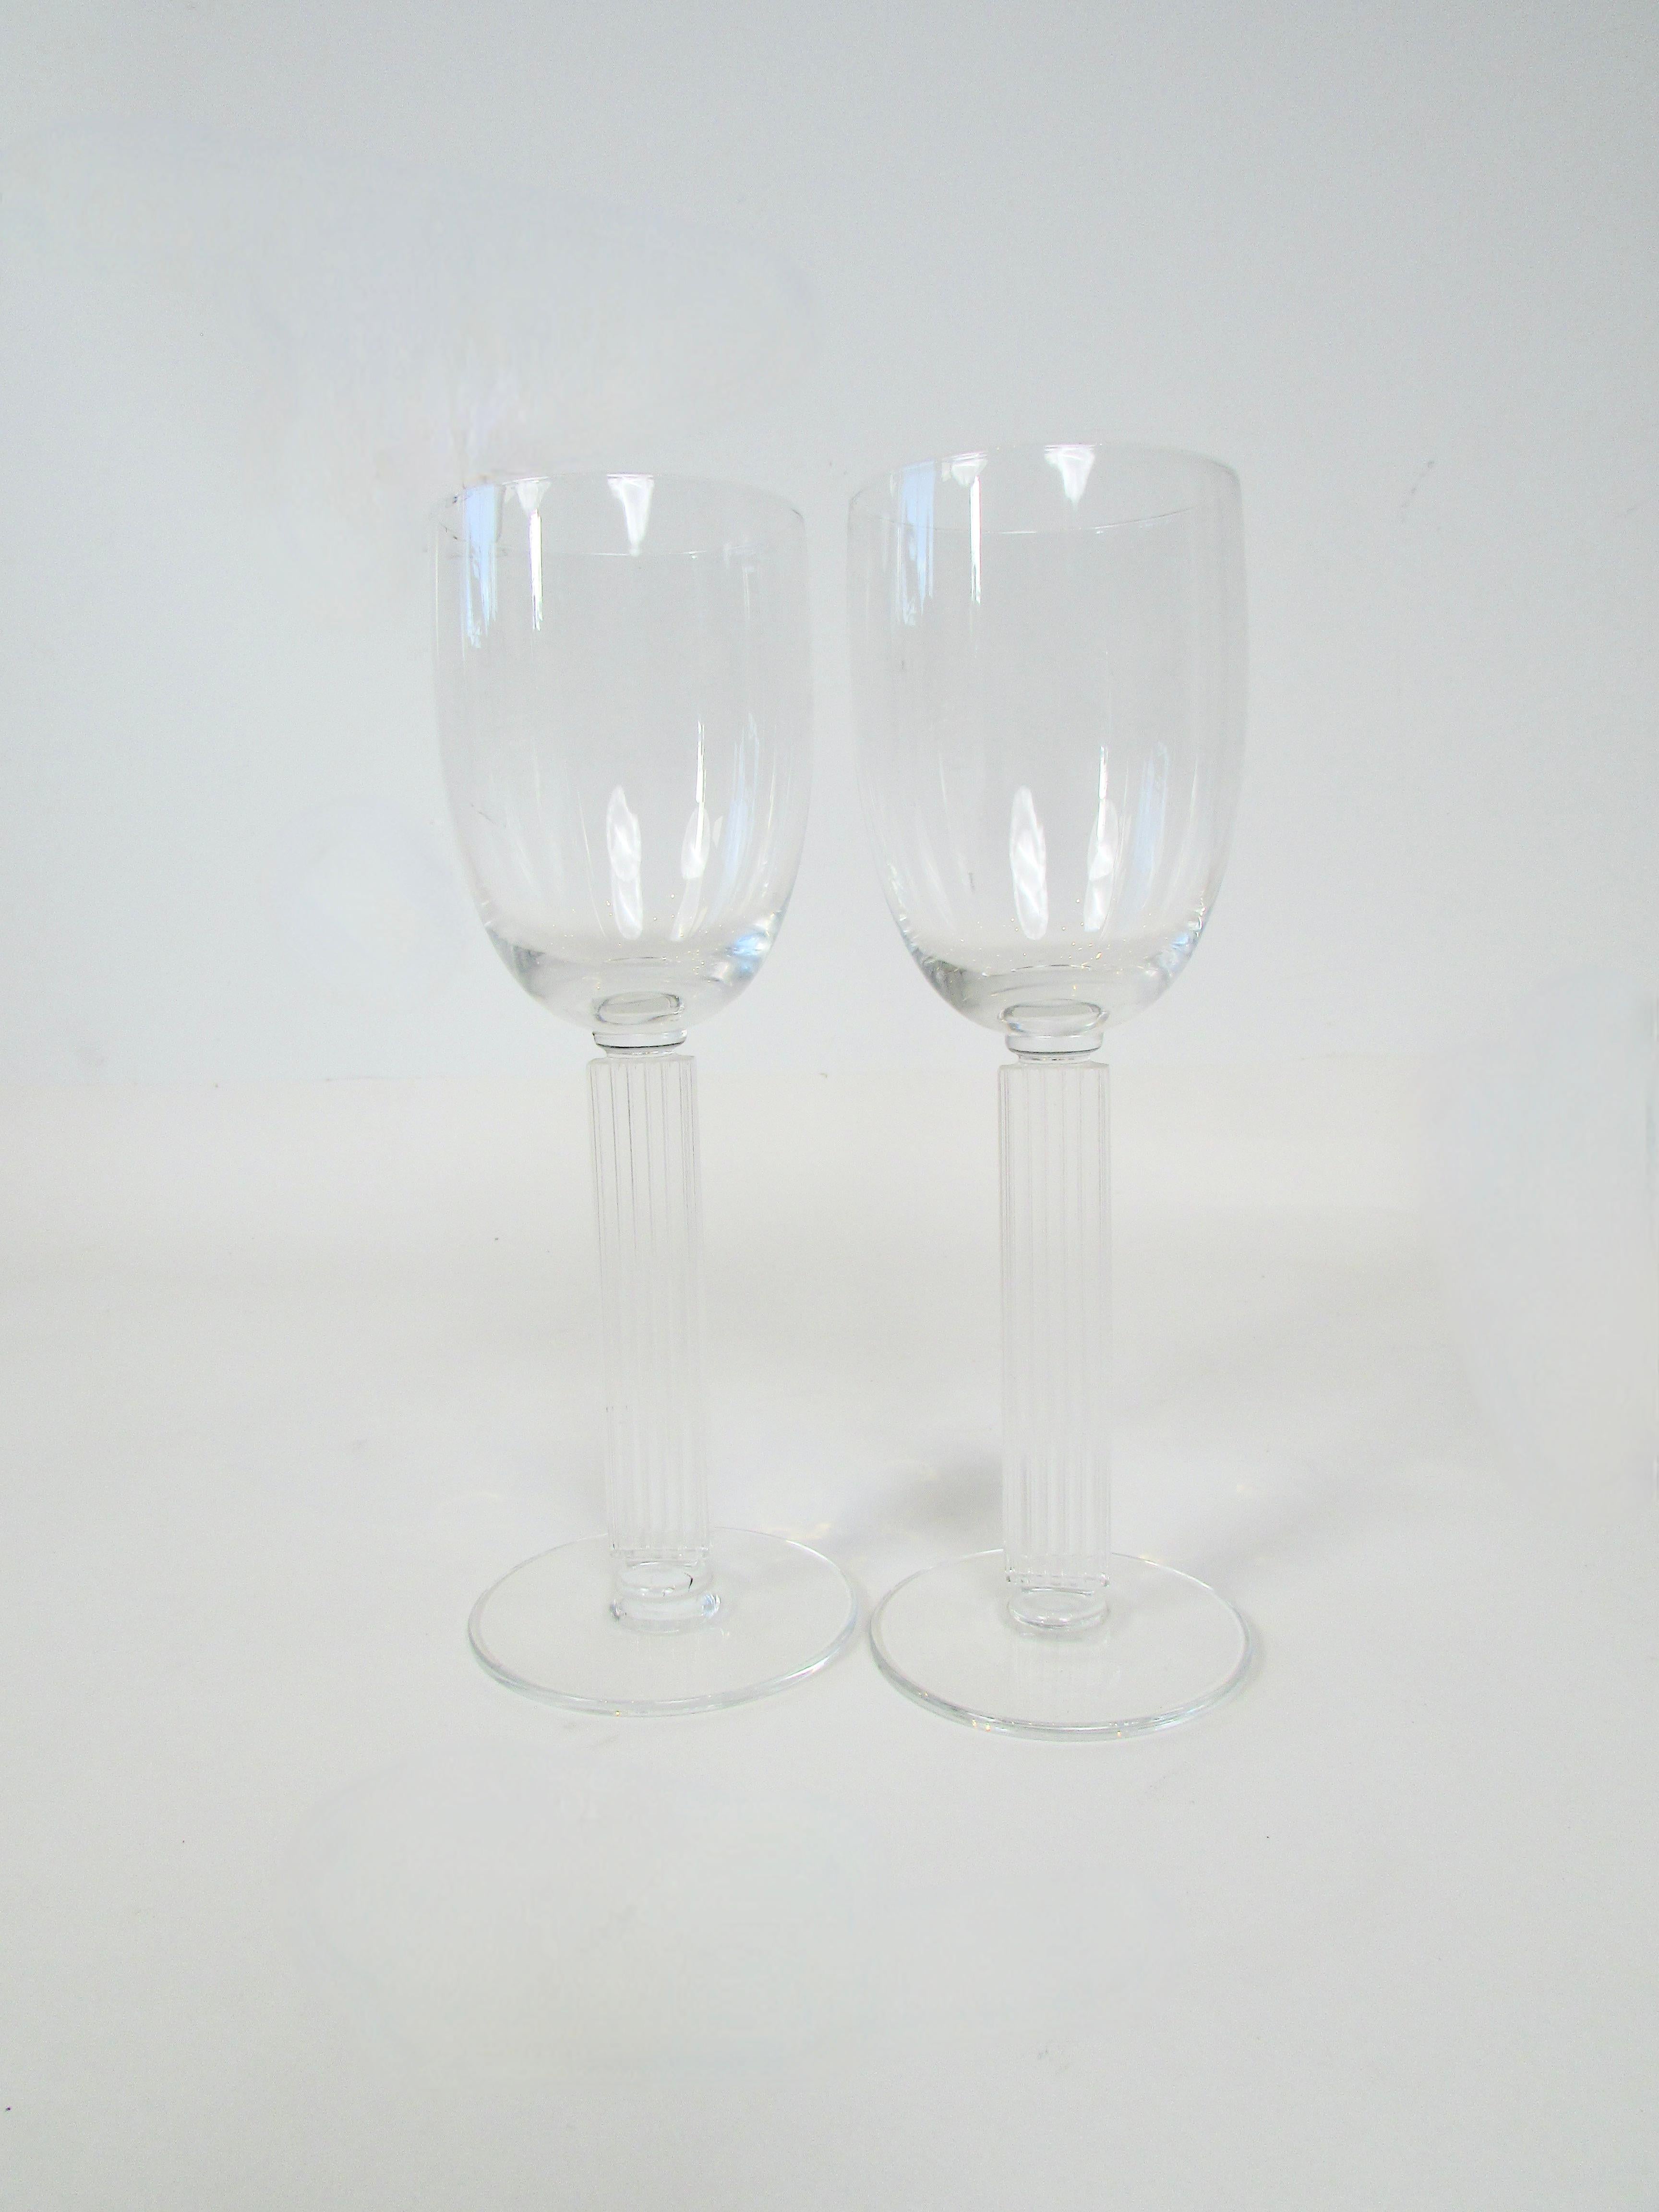 20th Century Pair of Walter Dorwin Teague Edwin Fuerst design Wine or Water Glasses For Sale